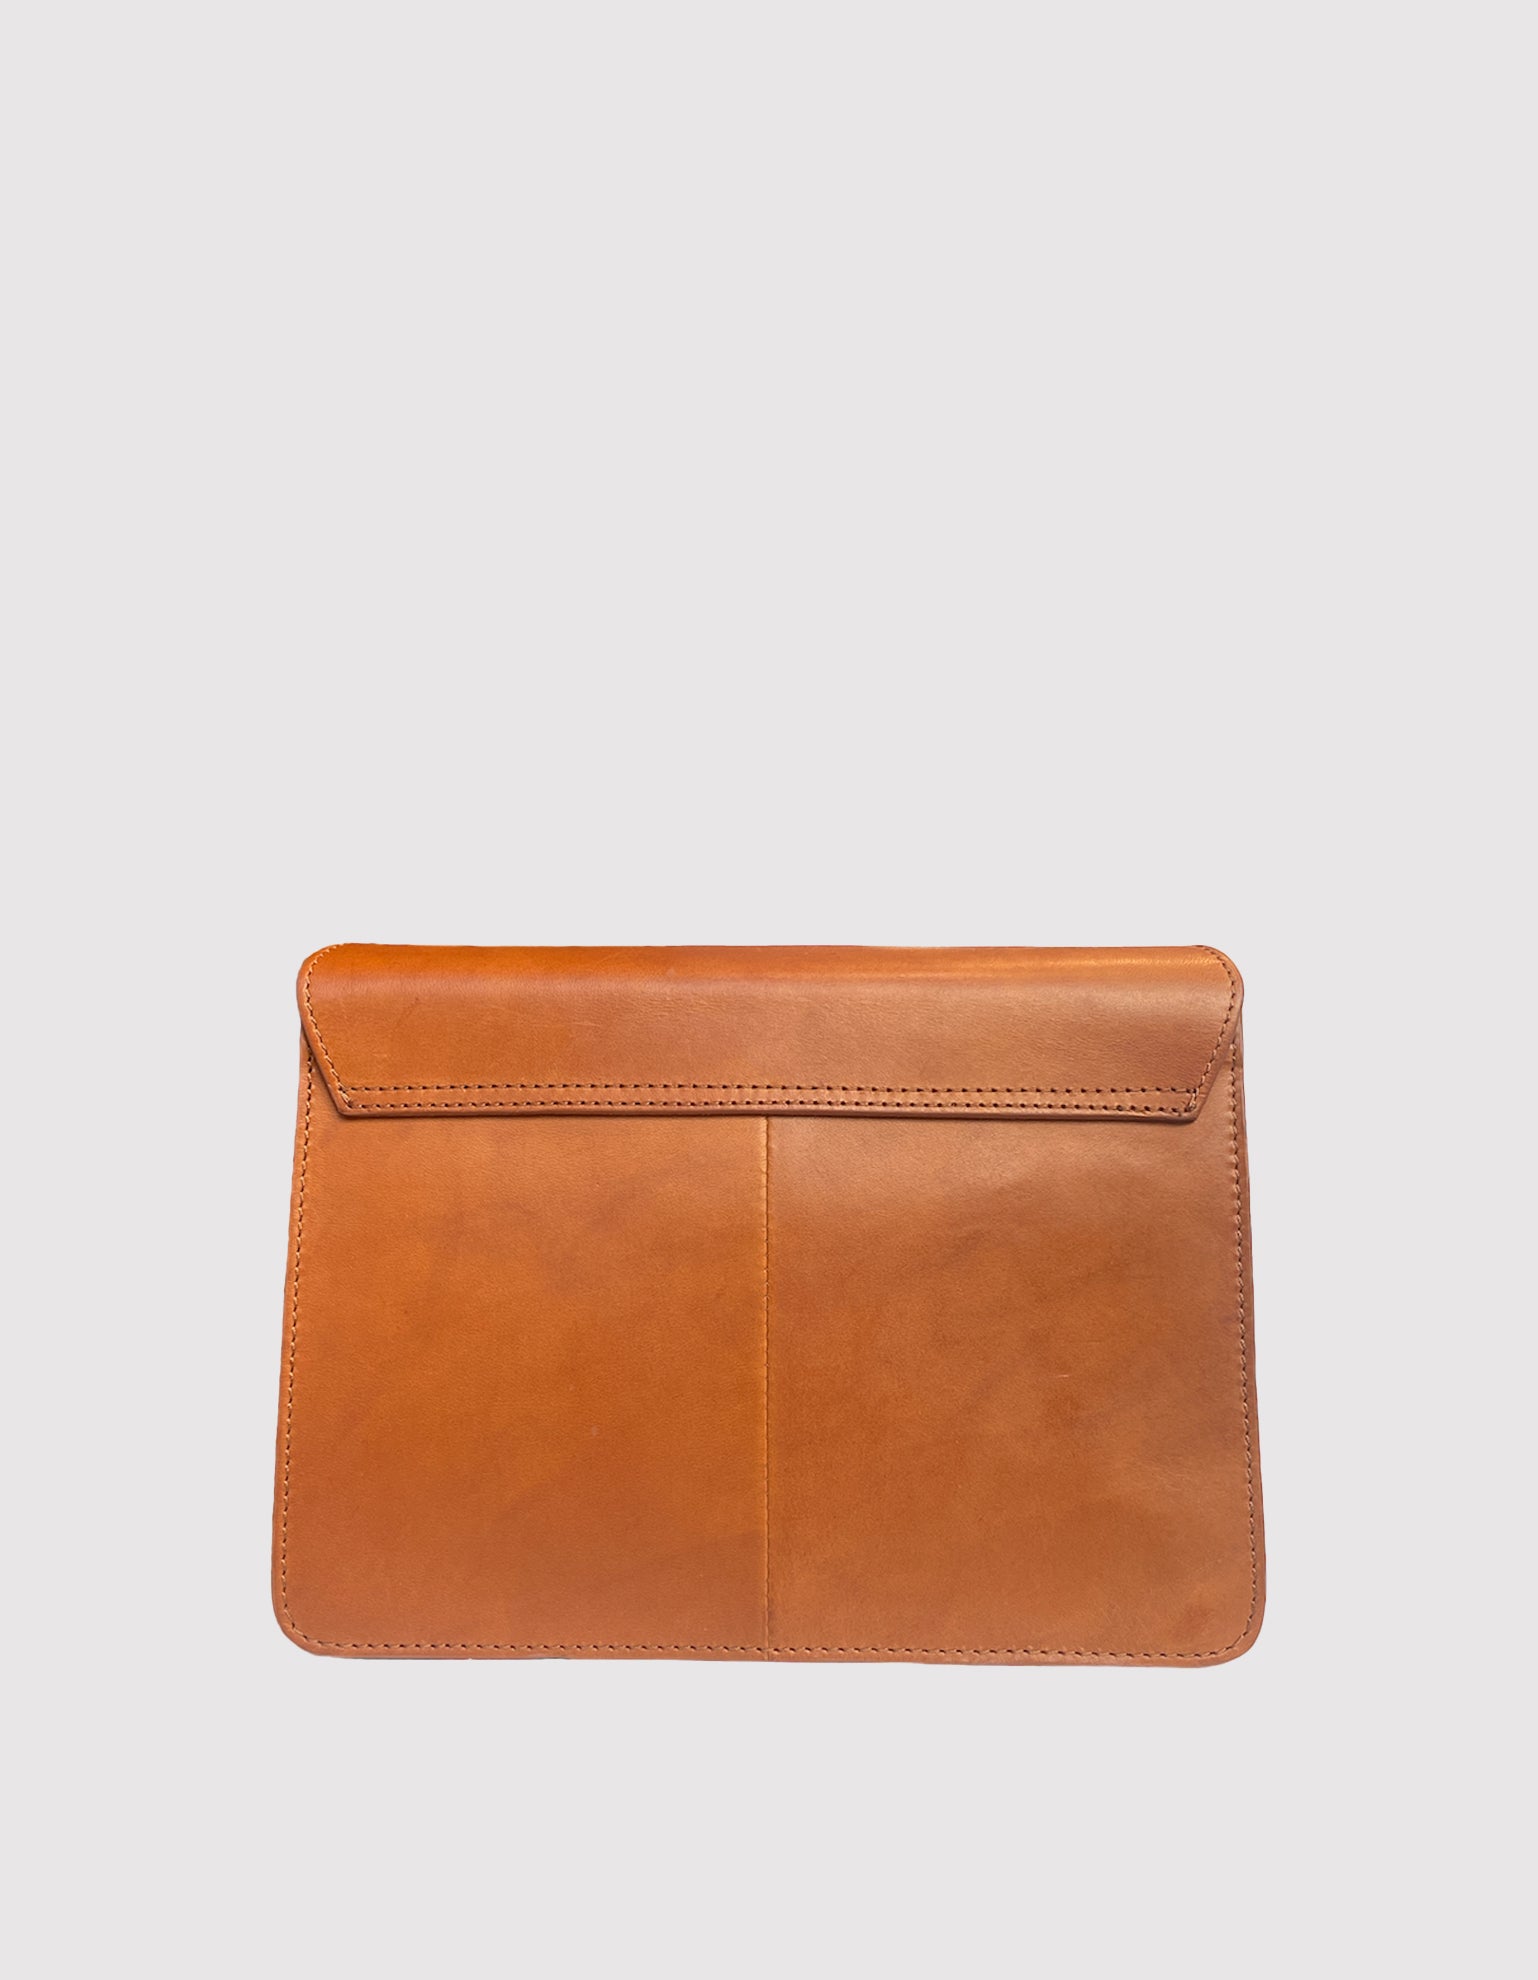 Perfectly Imperfect Audrey - Cognac Classic Leather